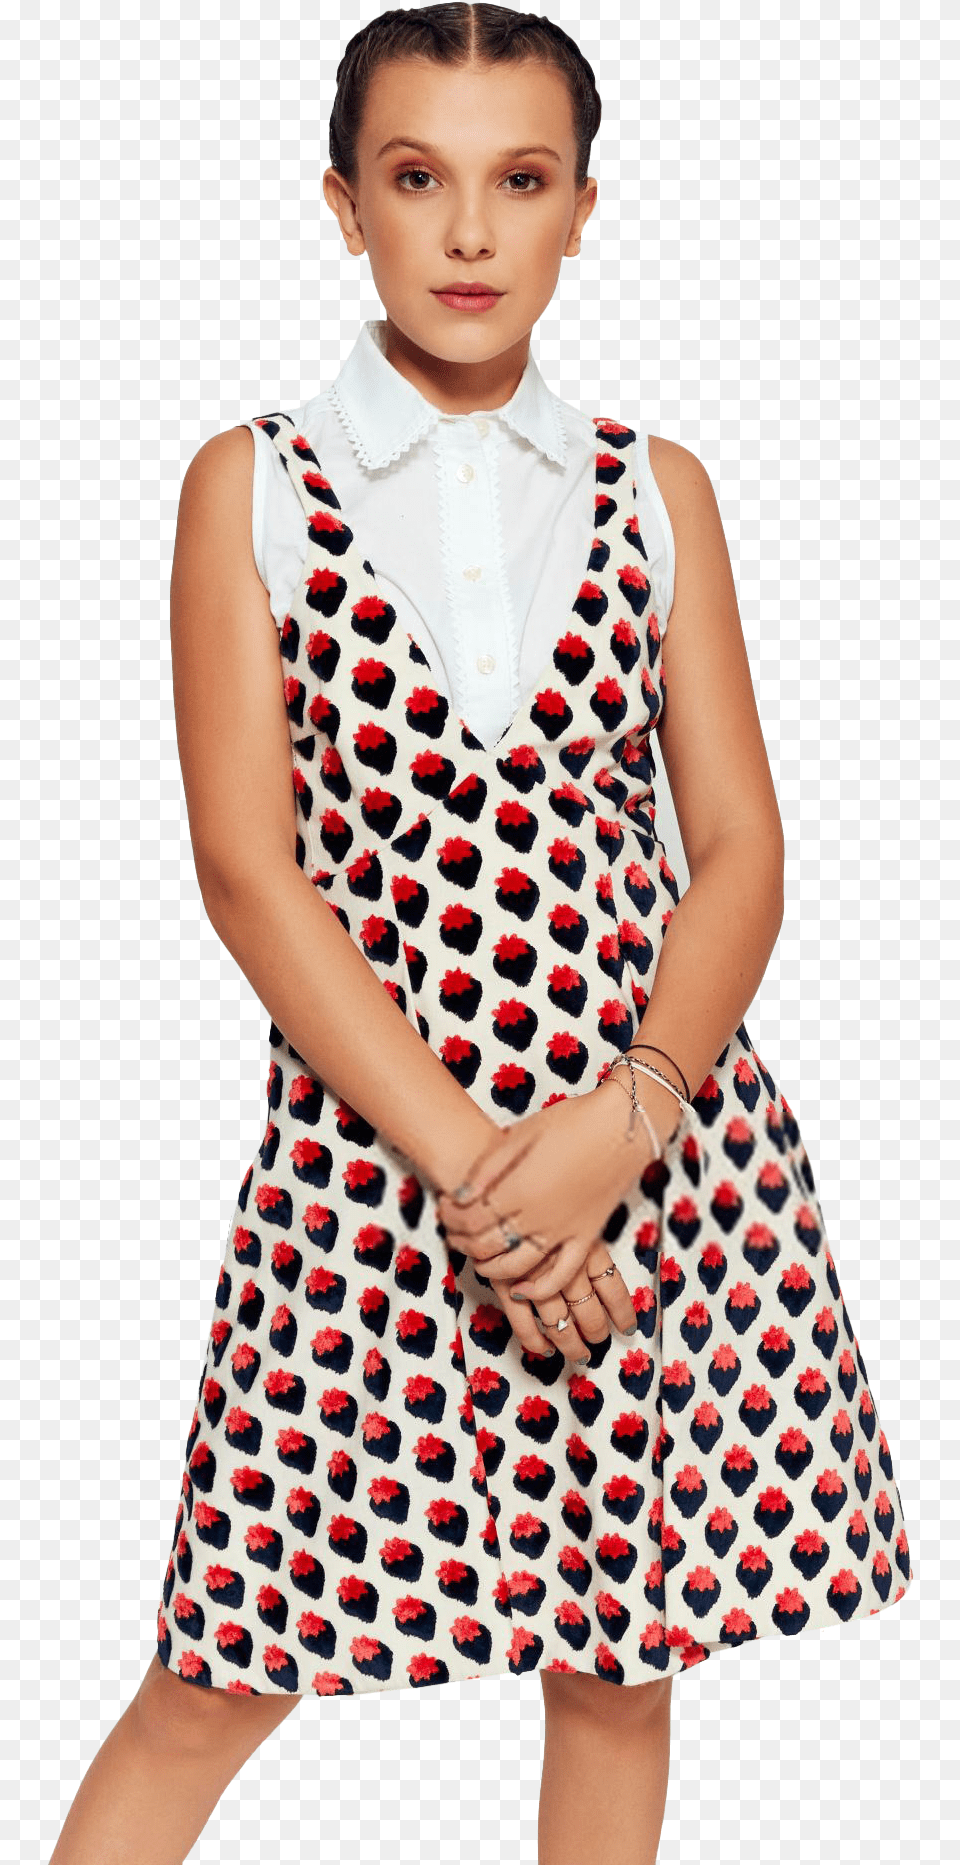 Find This Pin And More On Stranger Things Png39s By Transparent Millie Bobby Brown, Blouse, Clothing, Dress, Pattern Png Image